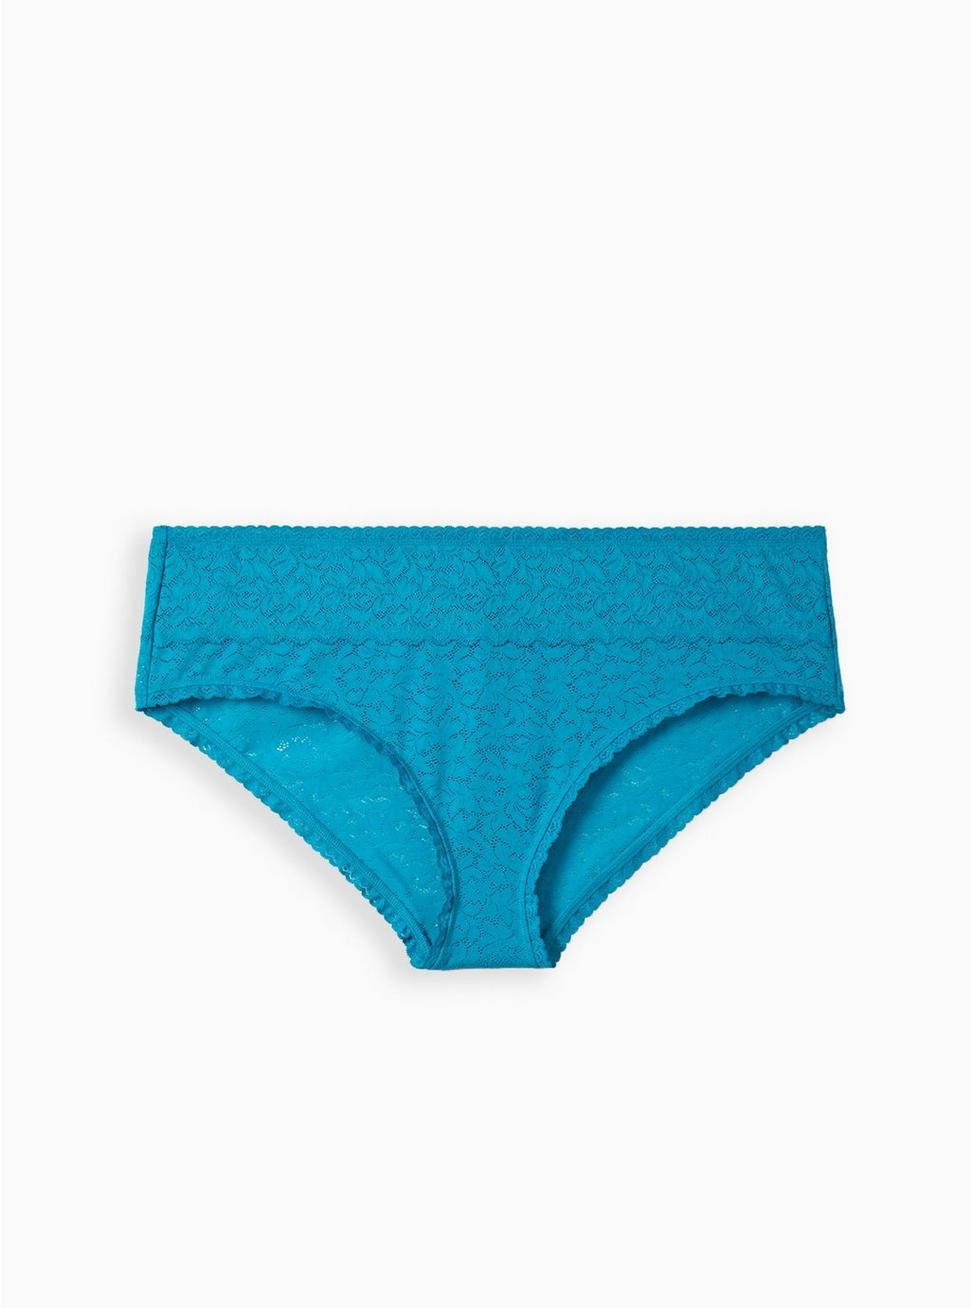 4-Way Stretch Lace Mid-Rise Hipster Panty, ENAMEL BLUE, hi-res